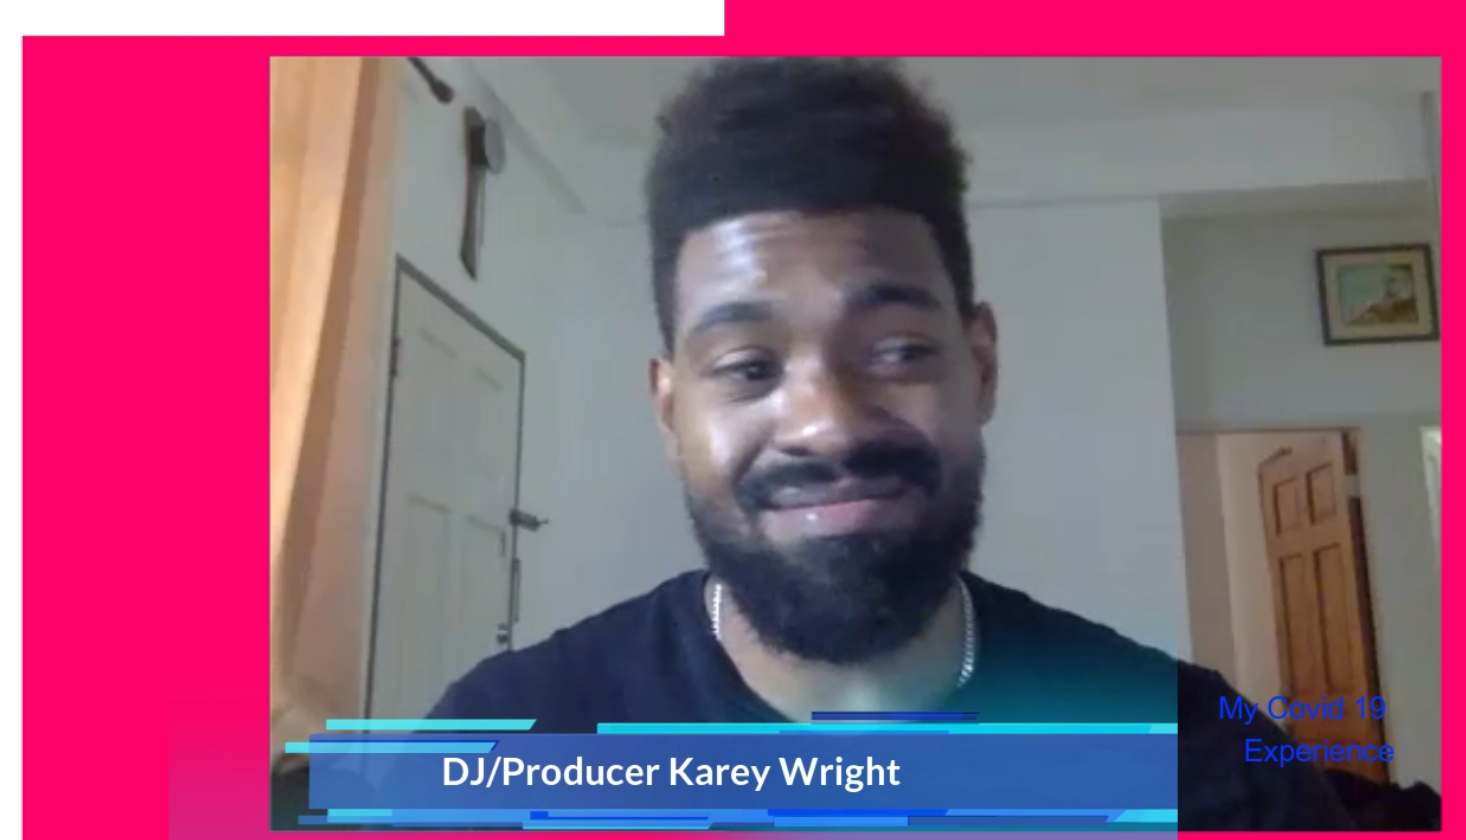 Young DJ/ Producer Karey Wright: “I thought i was going to die from Covid-19”